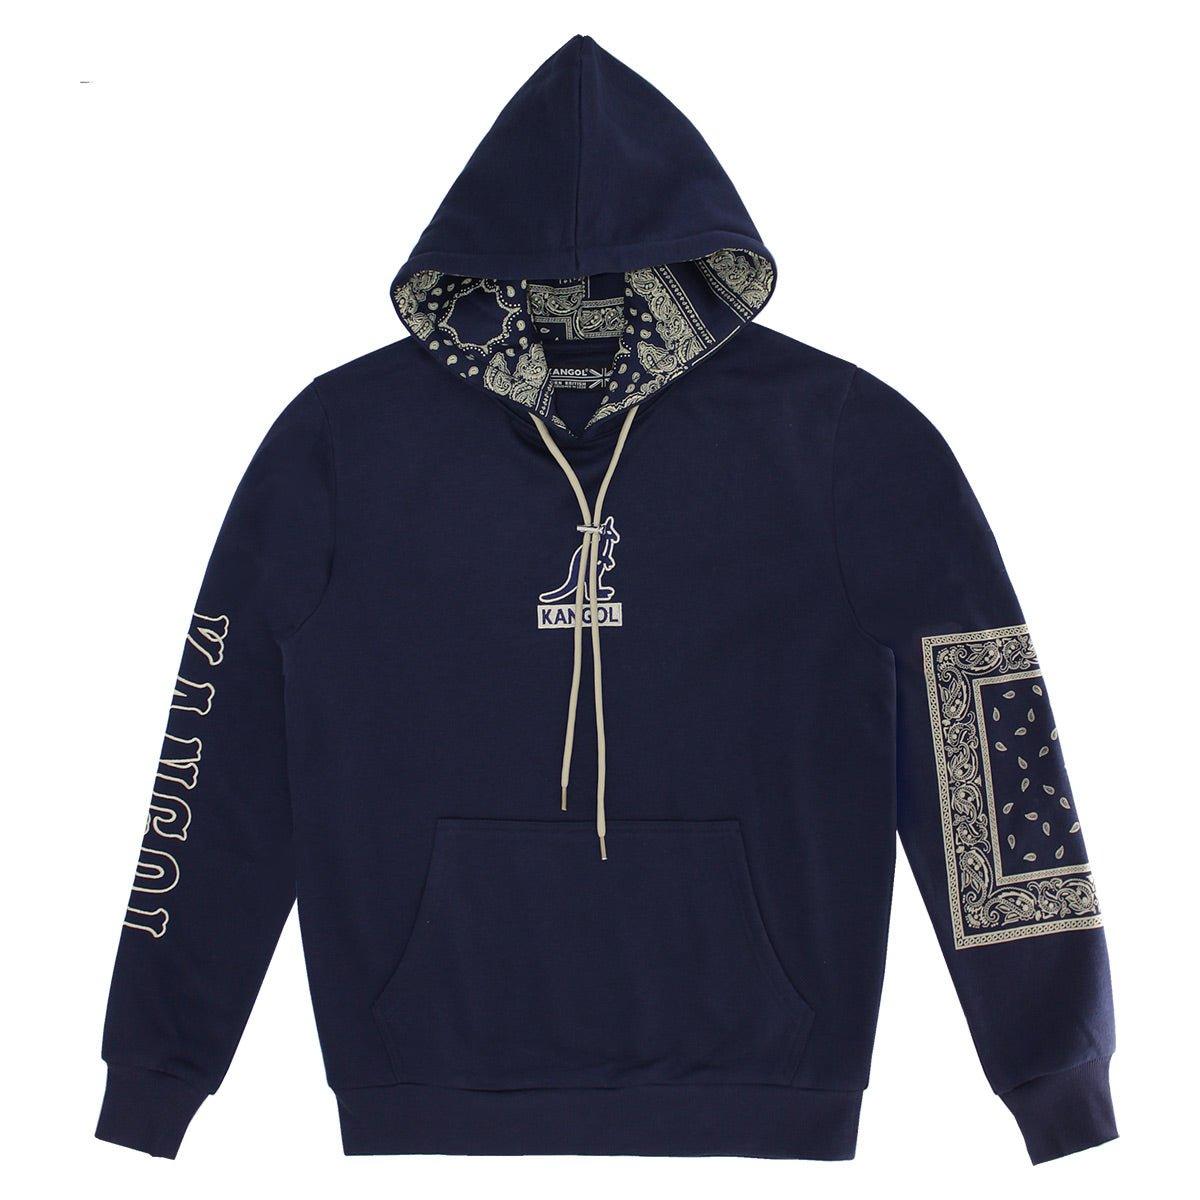 Black Pullover Hoodie with Paisley Hood Lining